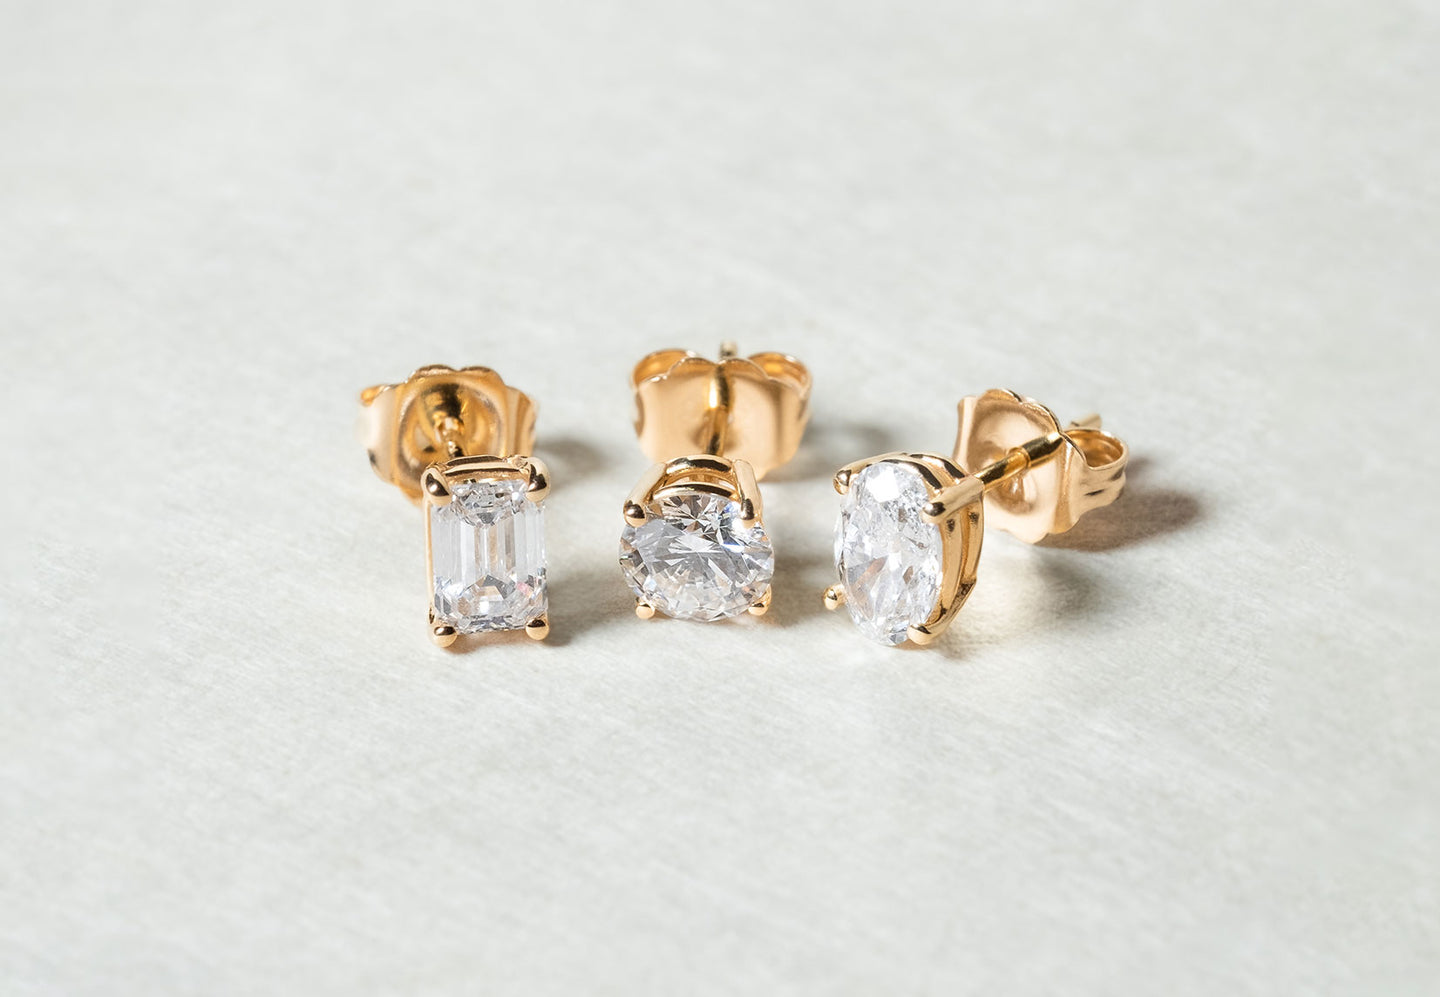 The Emerald Diamond Stud, The Round Diamond Stud, and The Oval Diamond Stud by Holden in yellow gold